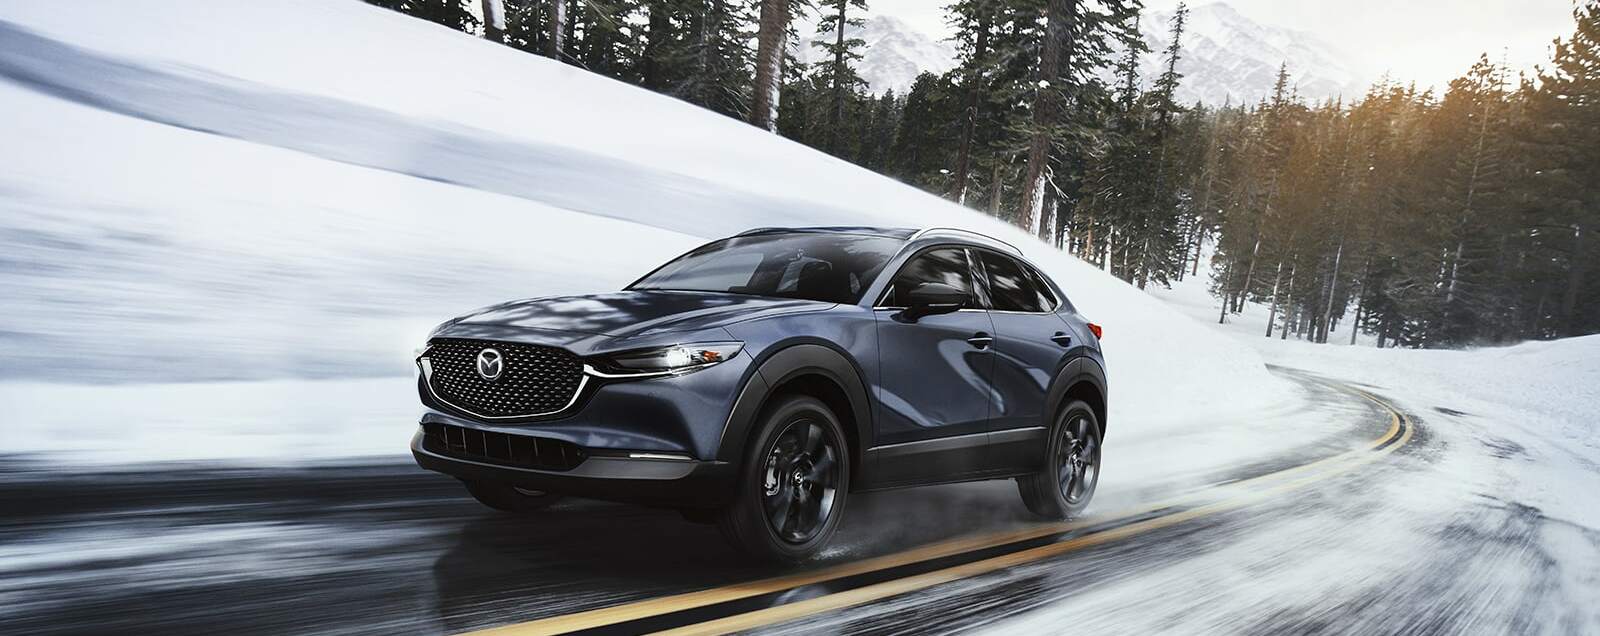 How Efficient is the 2023 Mazda CX-30 Engine in terms of fuel economy? -  Cardenas Mazda